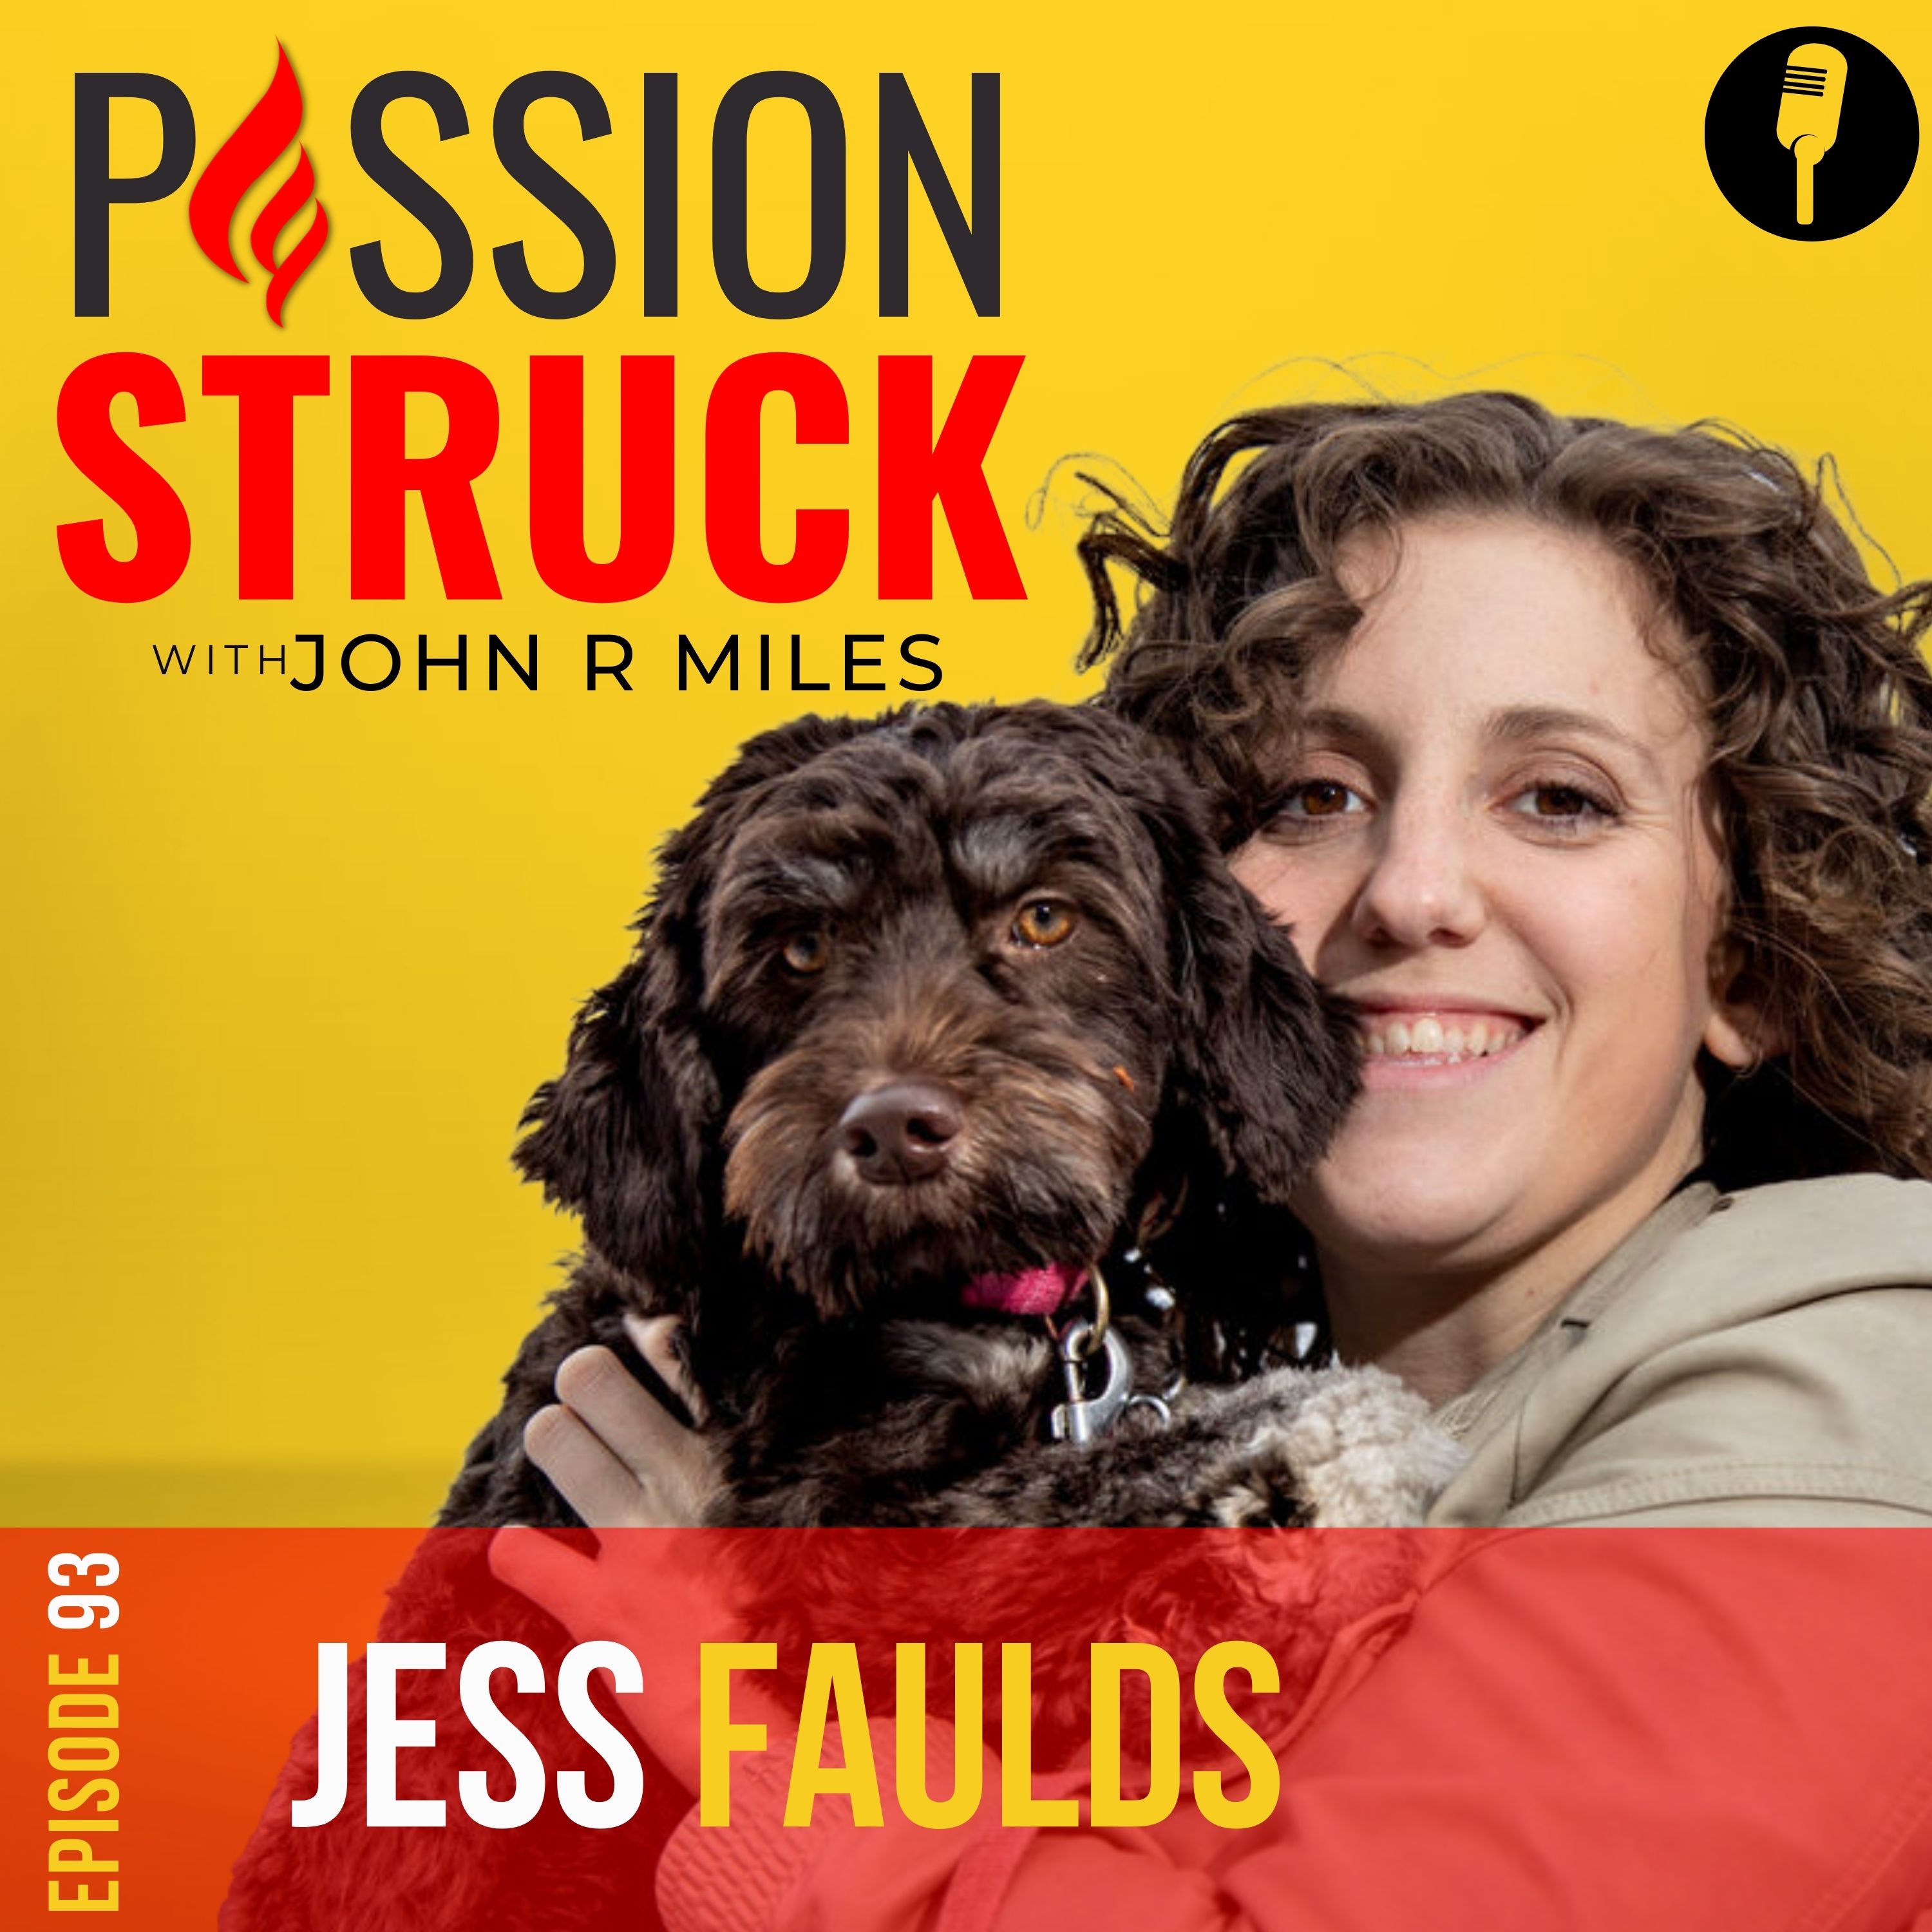 Passion Struck Podcast album cover featuring Jess Faulds about stem cell transplant